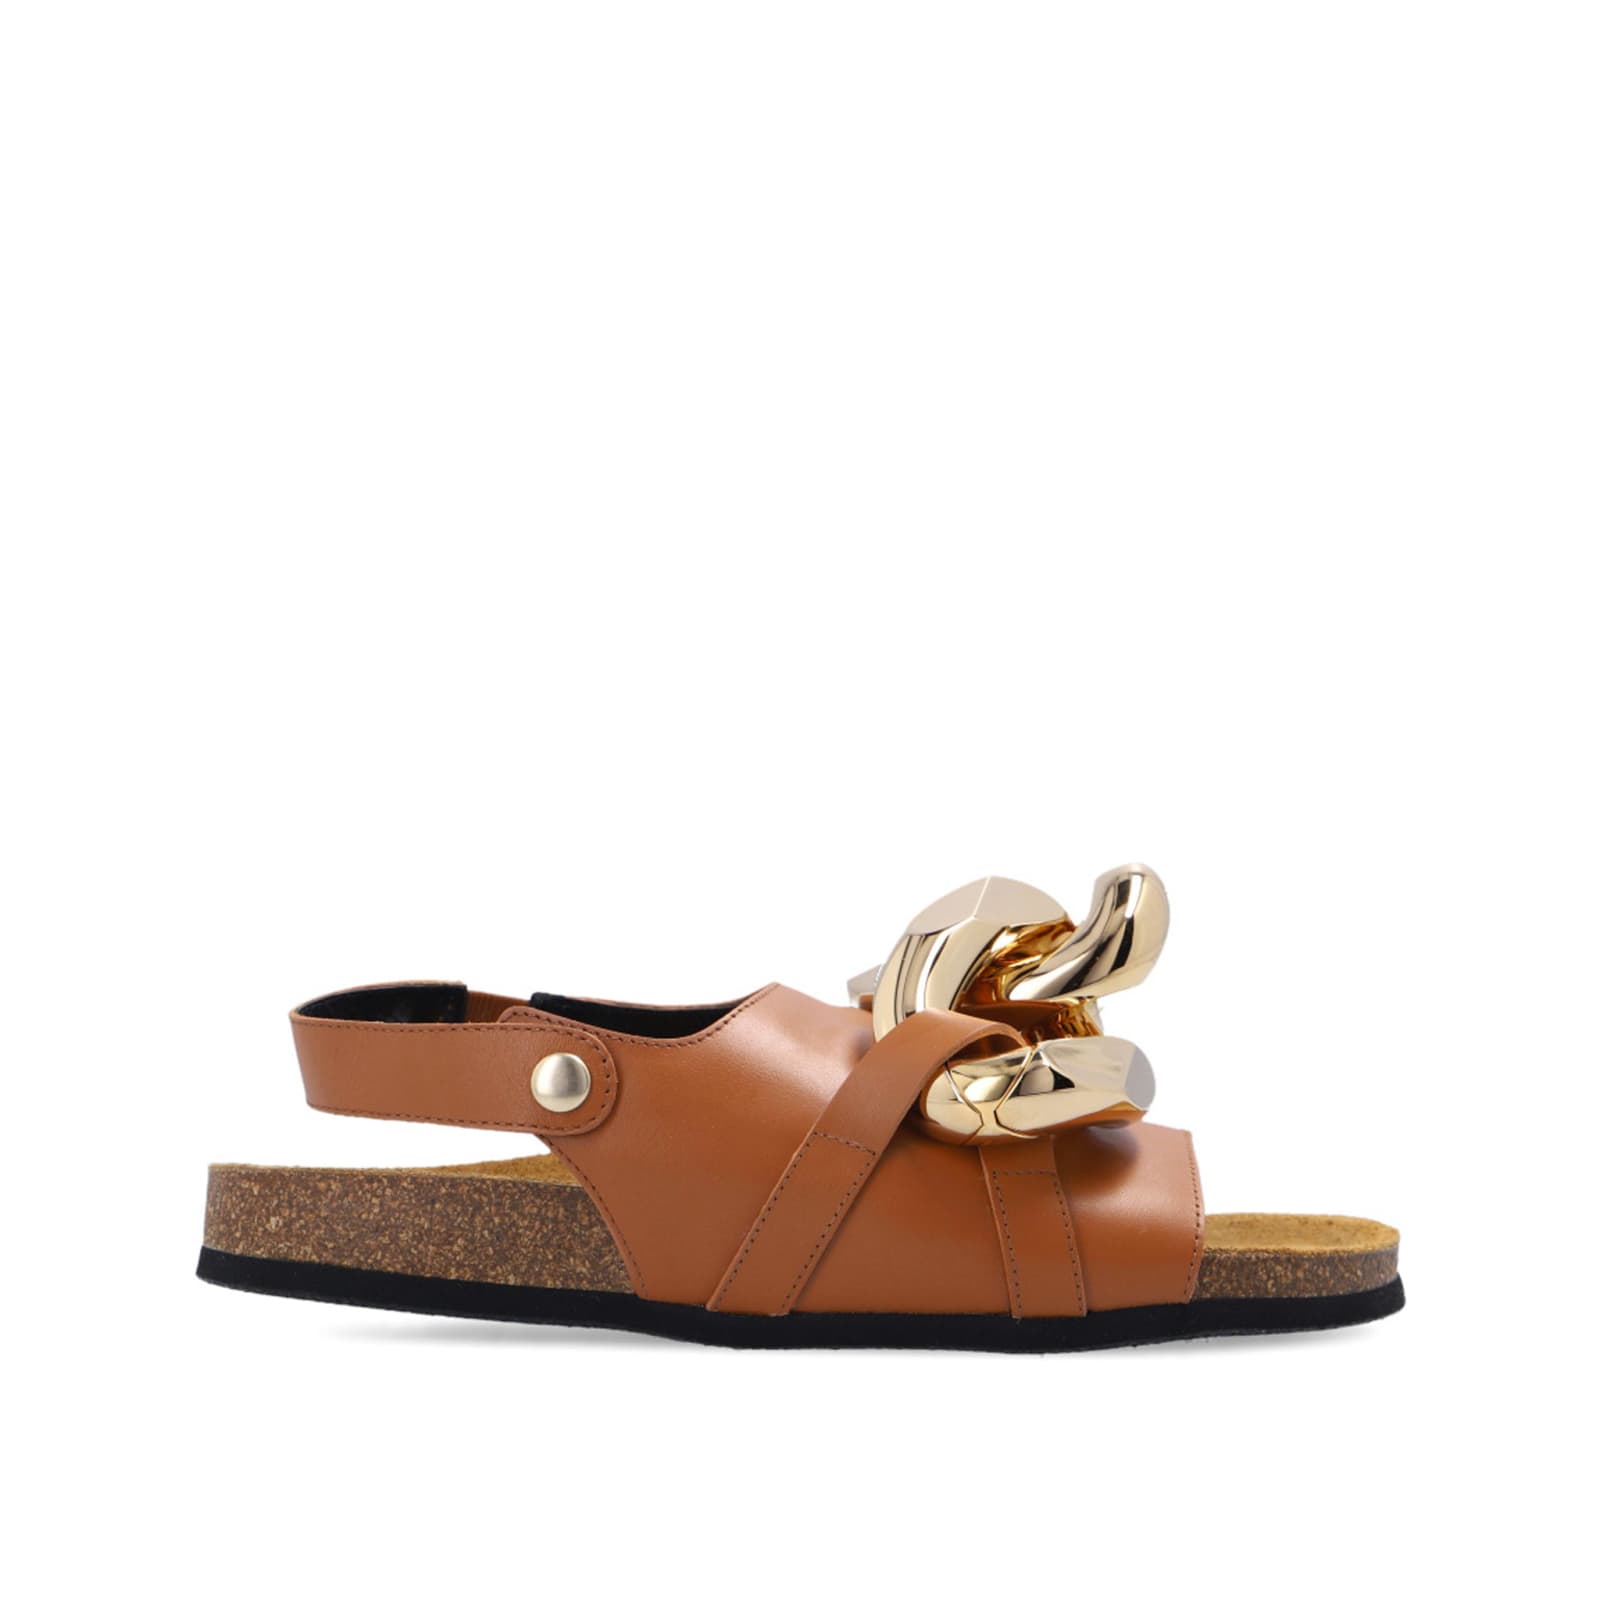 JW ANDERSON LEATHER SANDALS